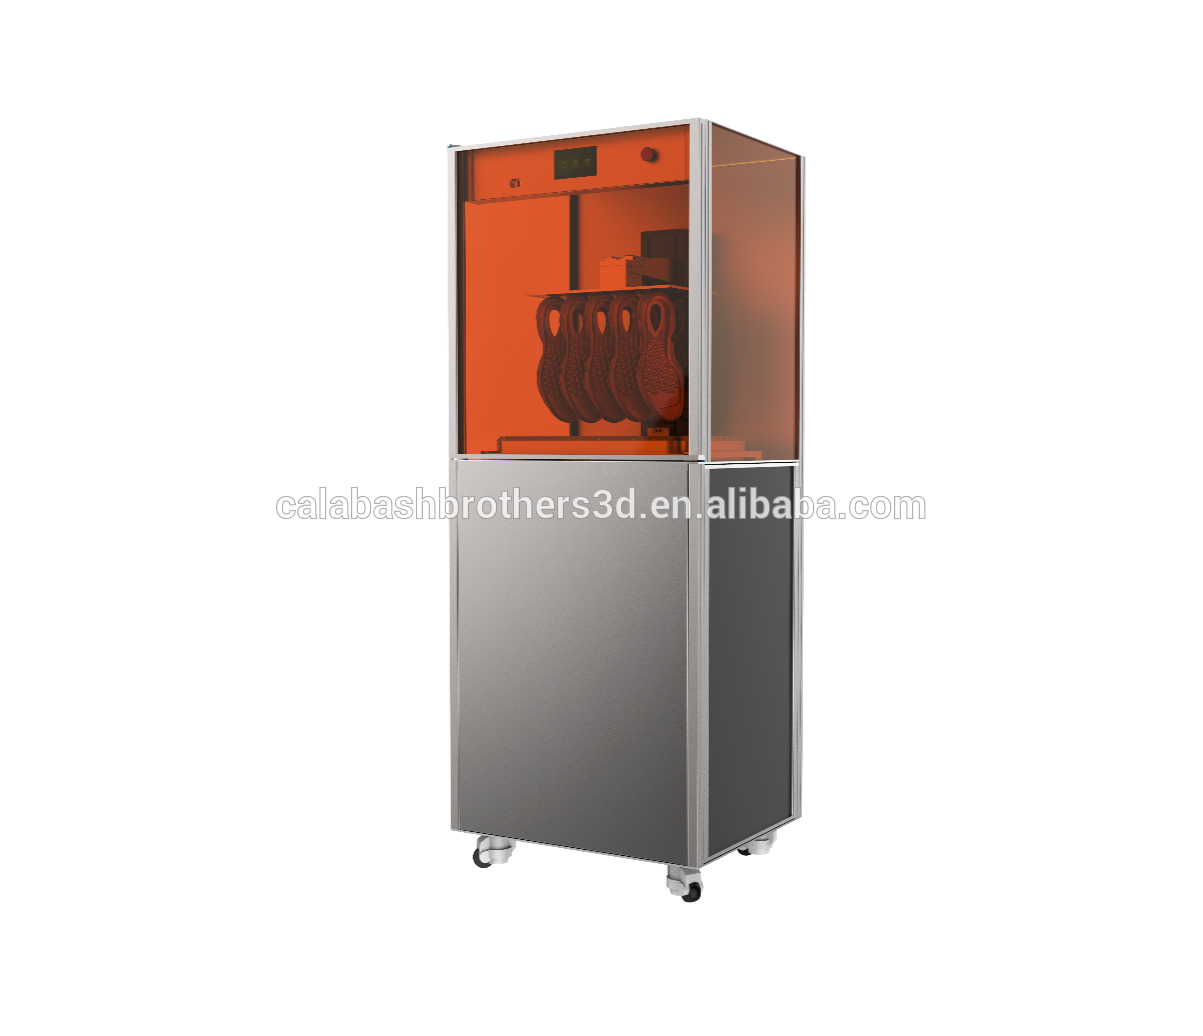 3840 x 2160P DLP 4K 3D Printing Machine With Printing Area 380*210*360mm Support STL OBJ SLC Files for Jewelry Molding